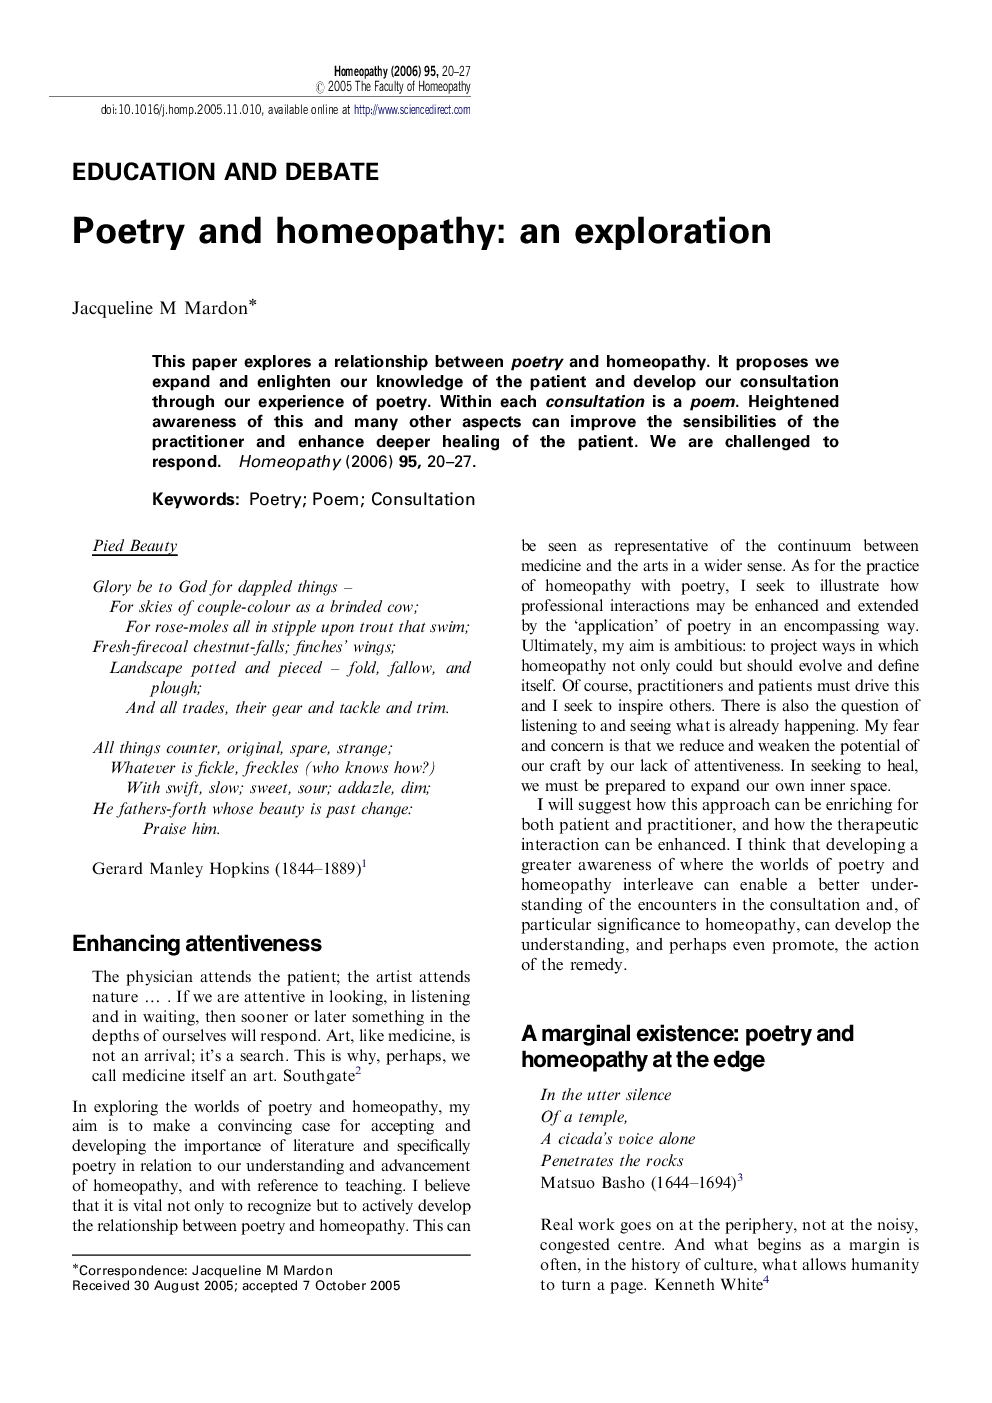 Poetry and homeopathy: an exploration